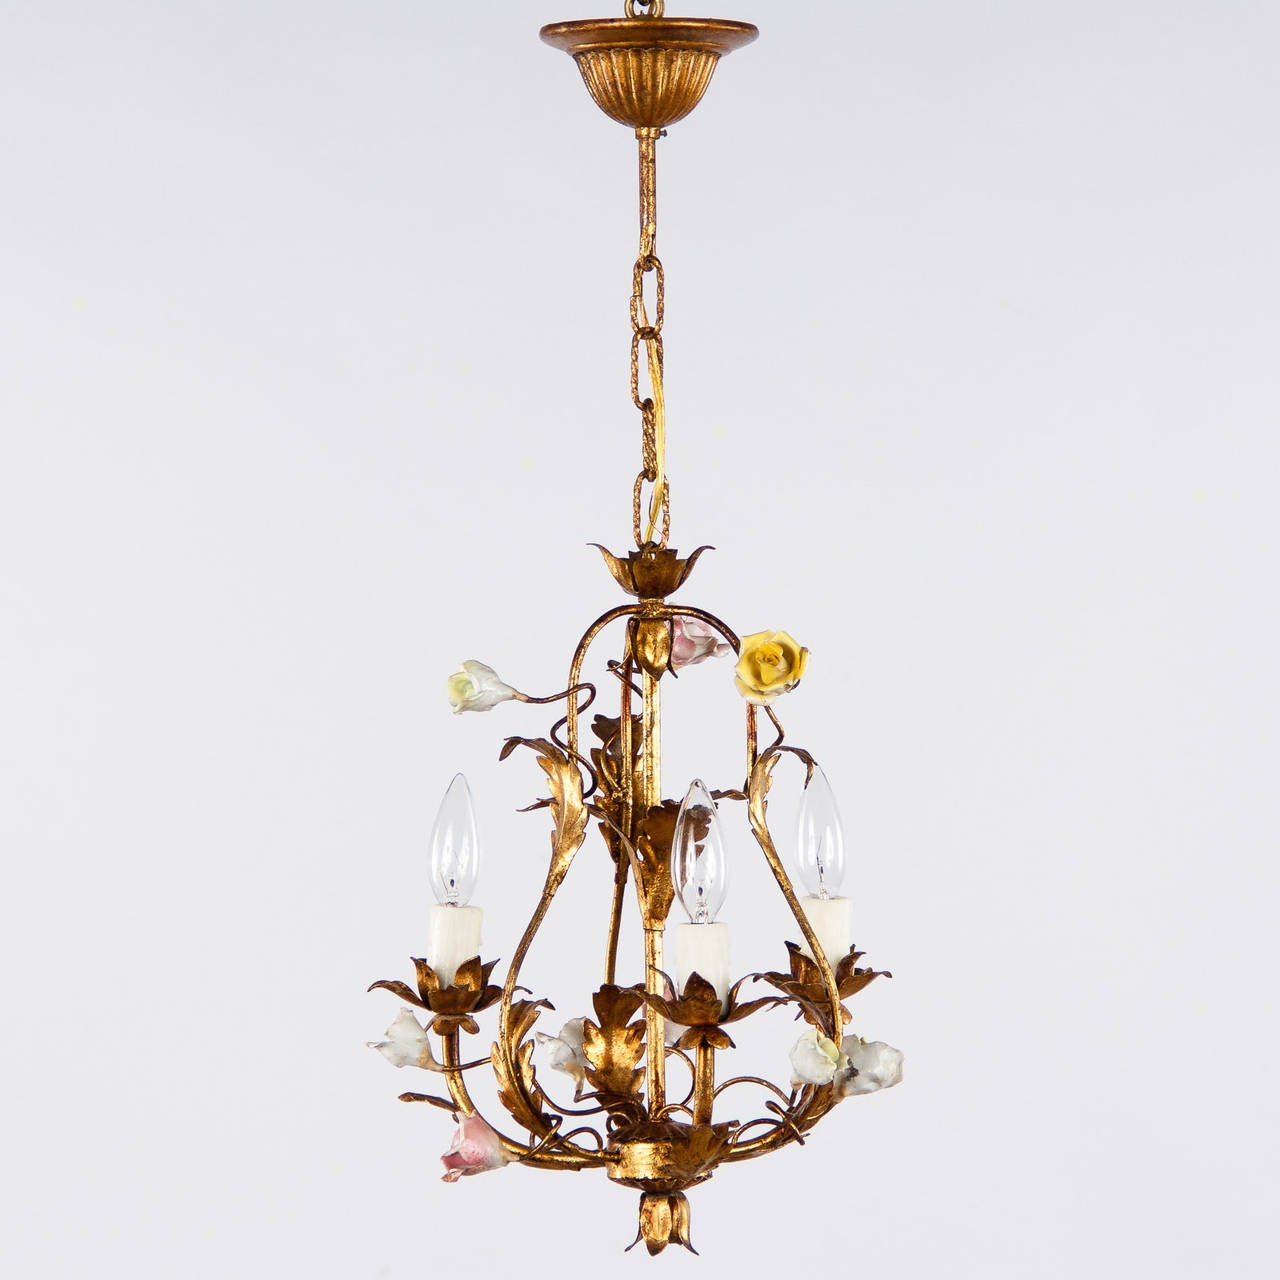 Gilt 1920's French Tole Chandelier with Porcelain Flowers